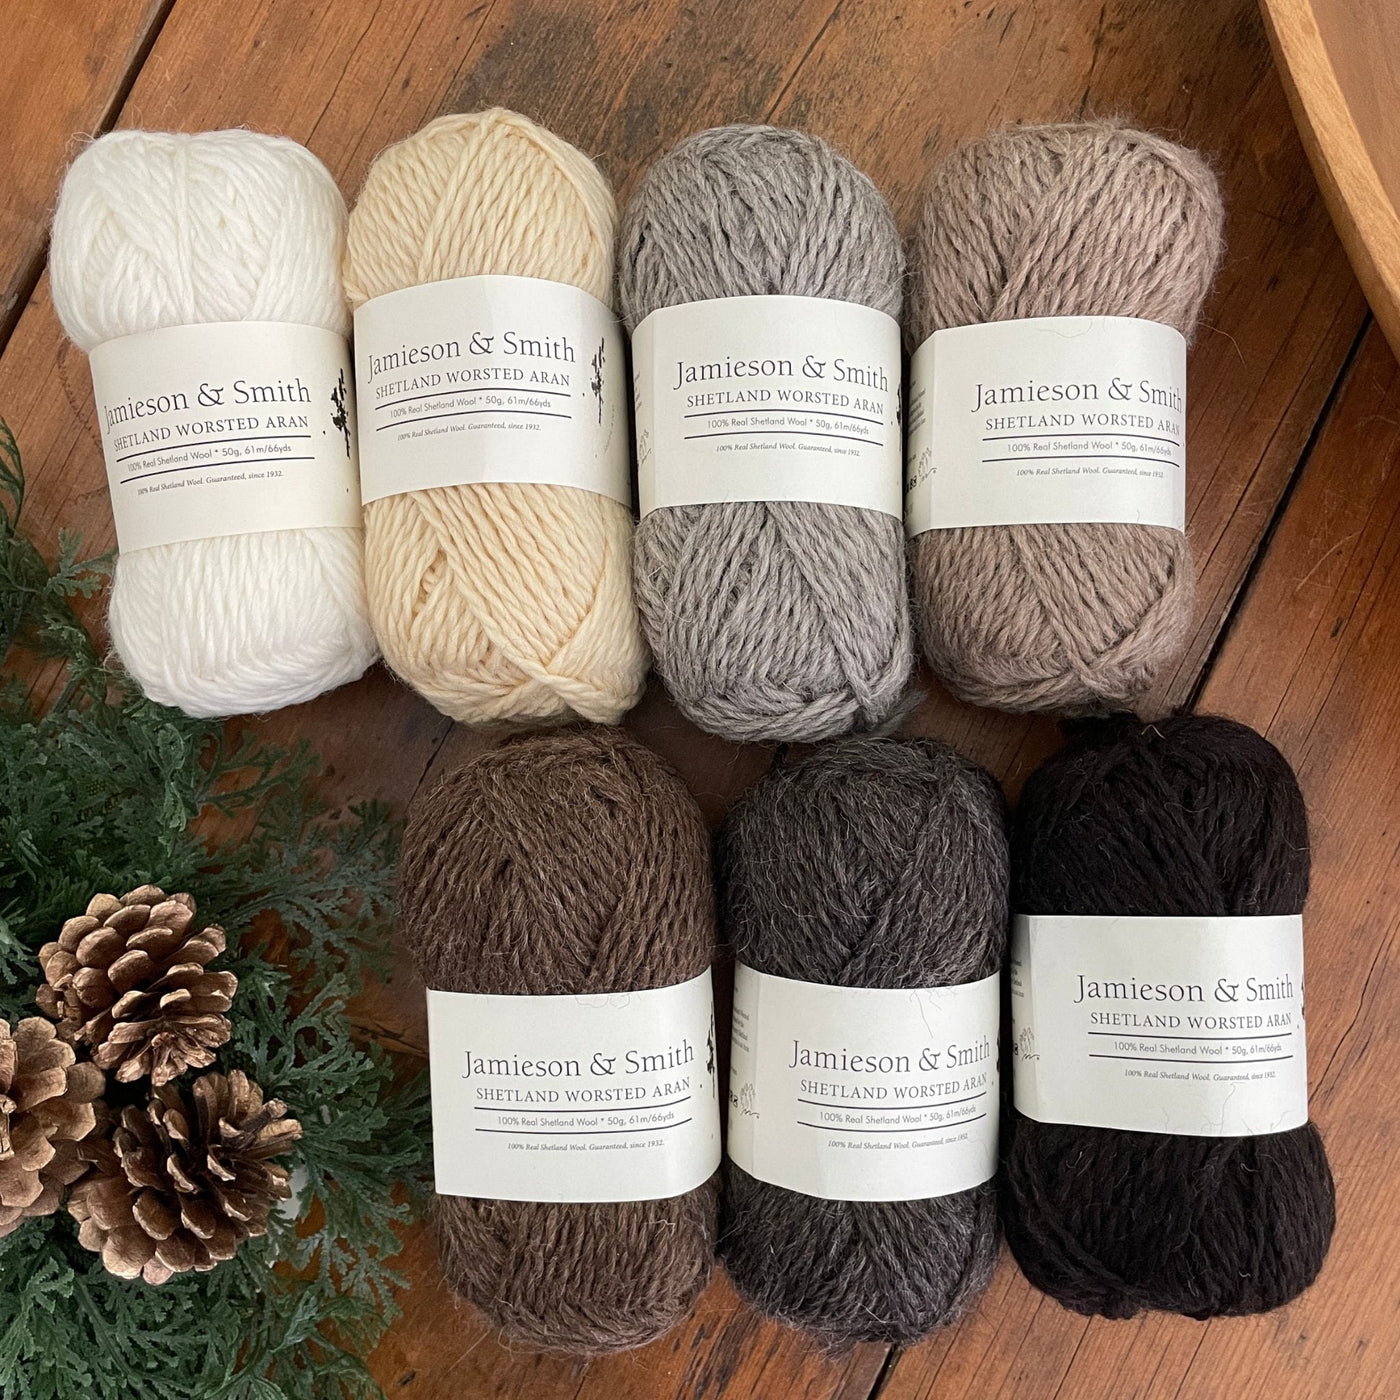 Jamieson & Smith Aran Worsted Yarn in natural shades arranged in two rows on wooden table with greenery and pinecones.